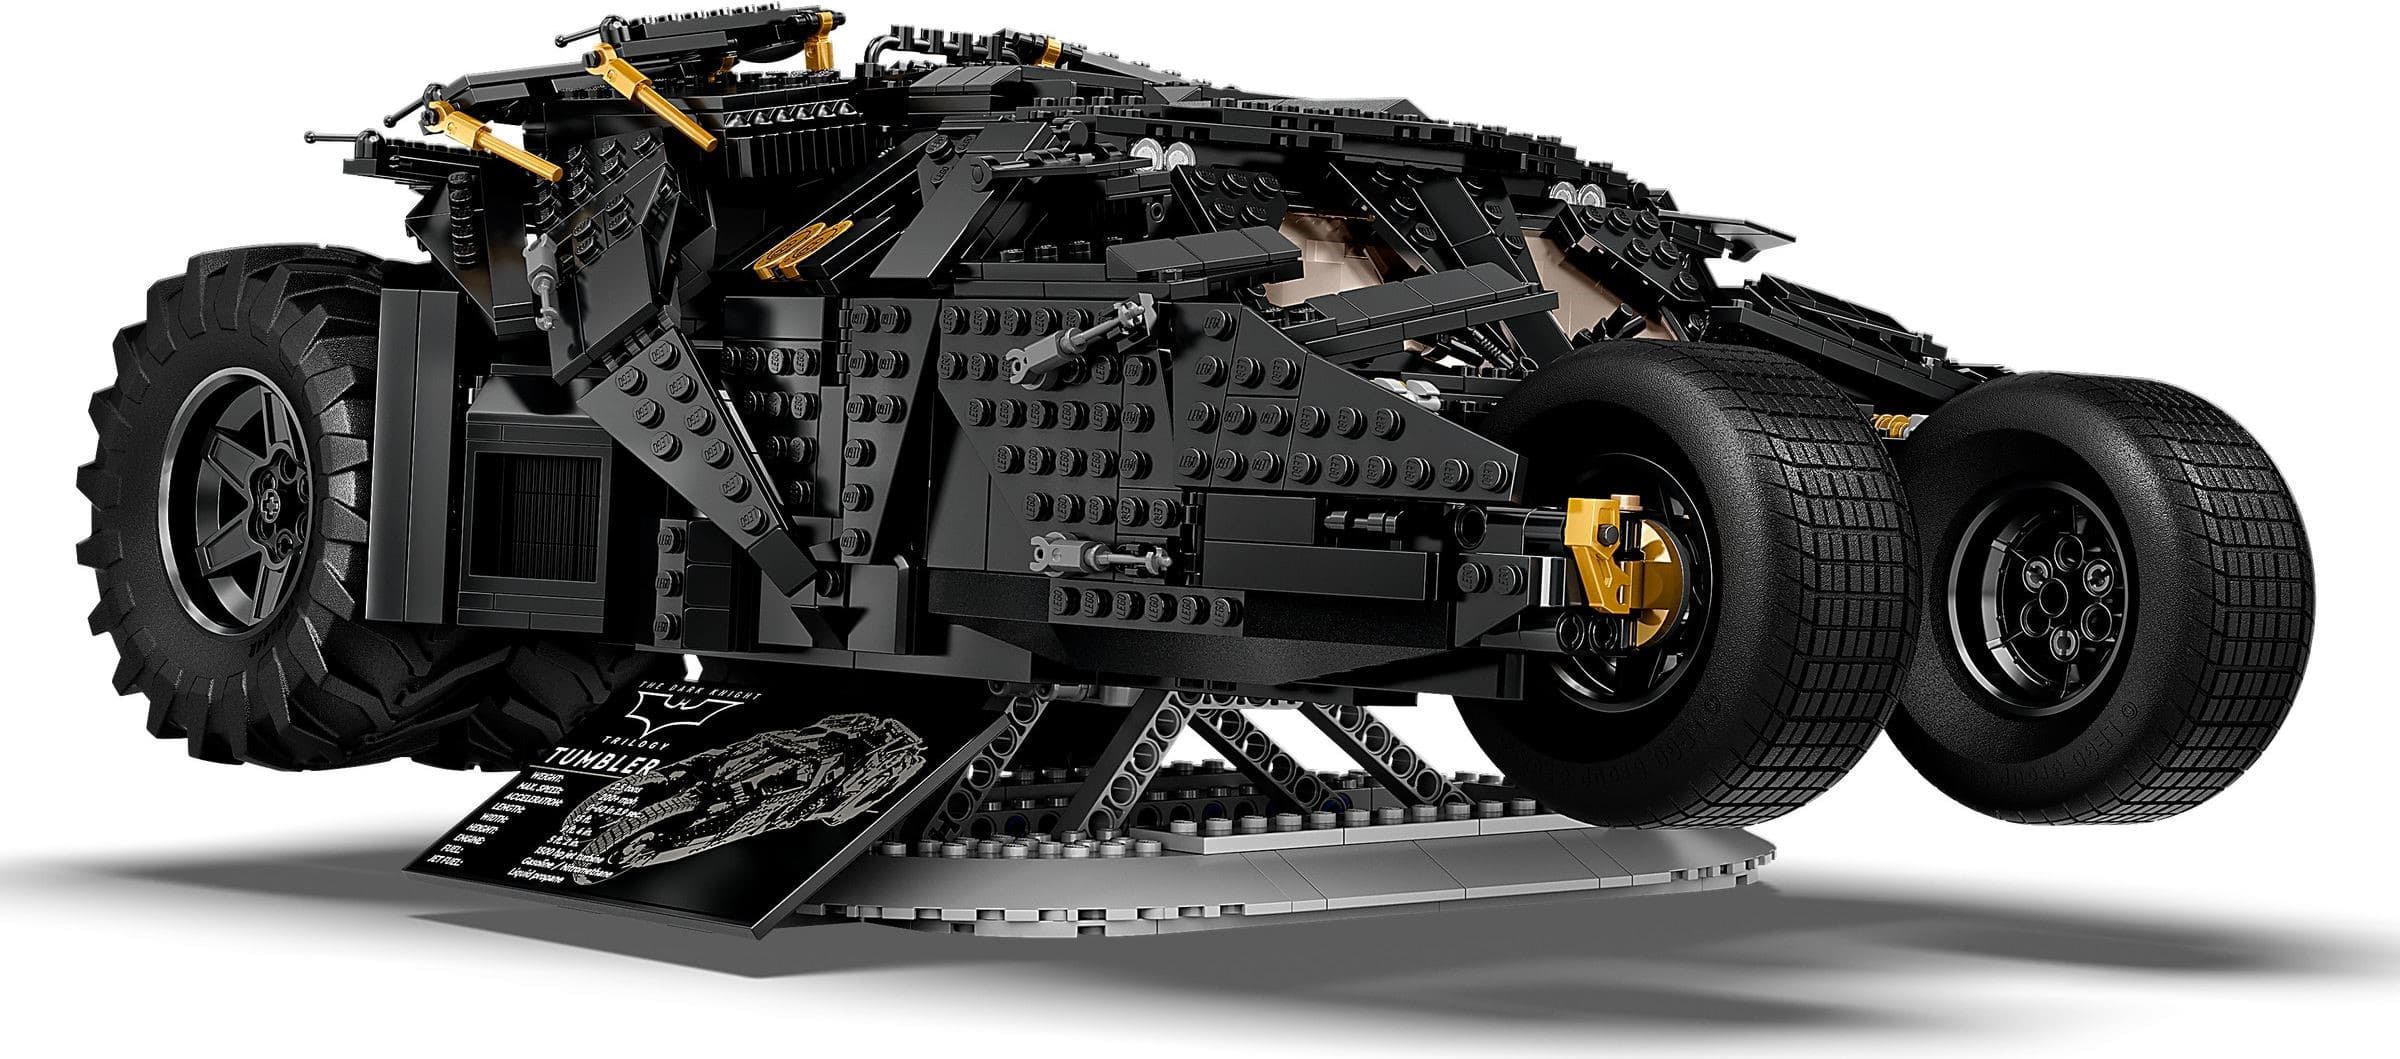 LEGO Releases September 2021: Batmobile Tumbler and More - IGN